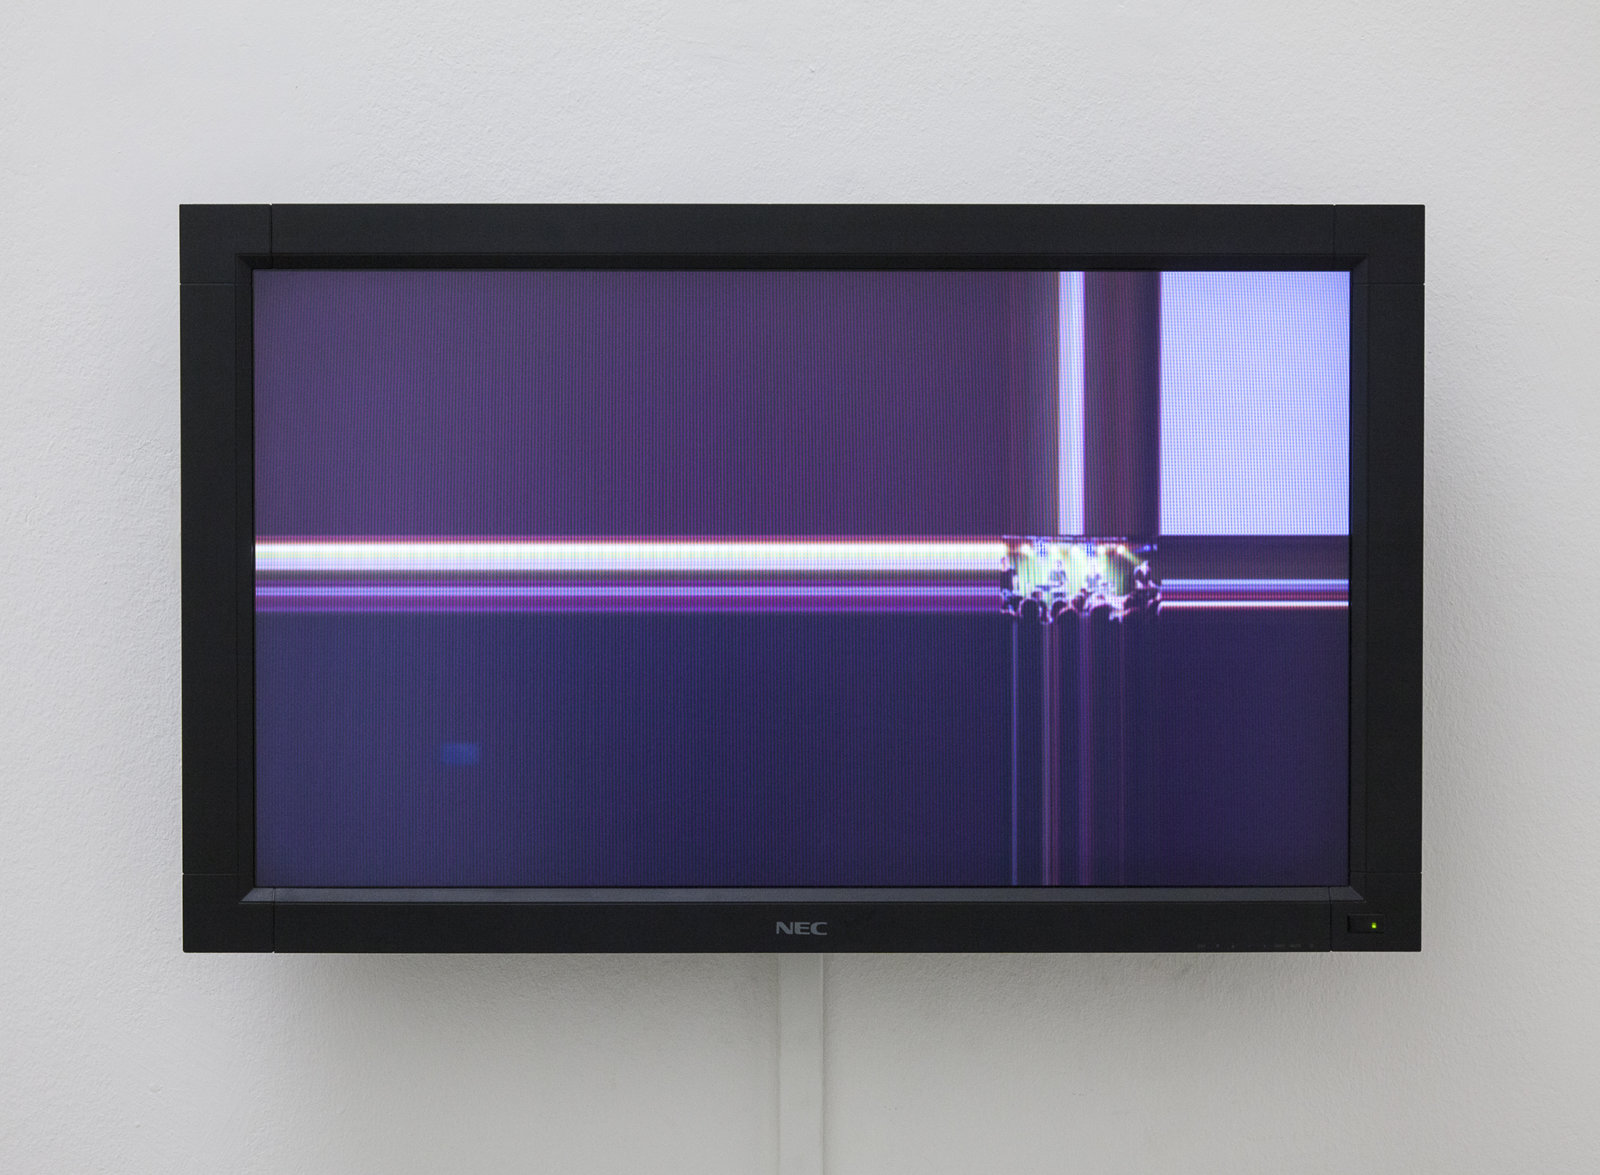 Judy Radul, A CONTAINER CONTAINING NOT ONE TV (detail), 2013, powder coated steel, CRT television, 2 flatscreen televisions, local television signal, remote control, two live video cameras, maxmsp patch, dimensions variable. Installation view, This	is	Television,	Daadgalerie,	Berlin,	Germany, 2013